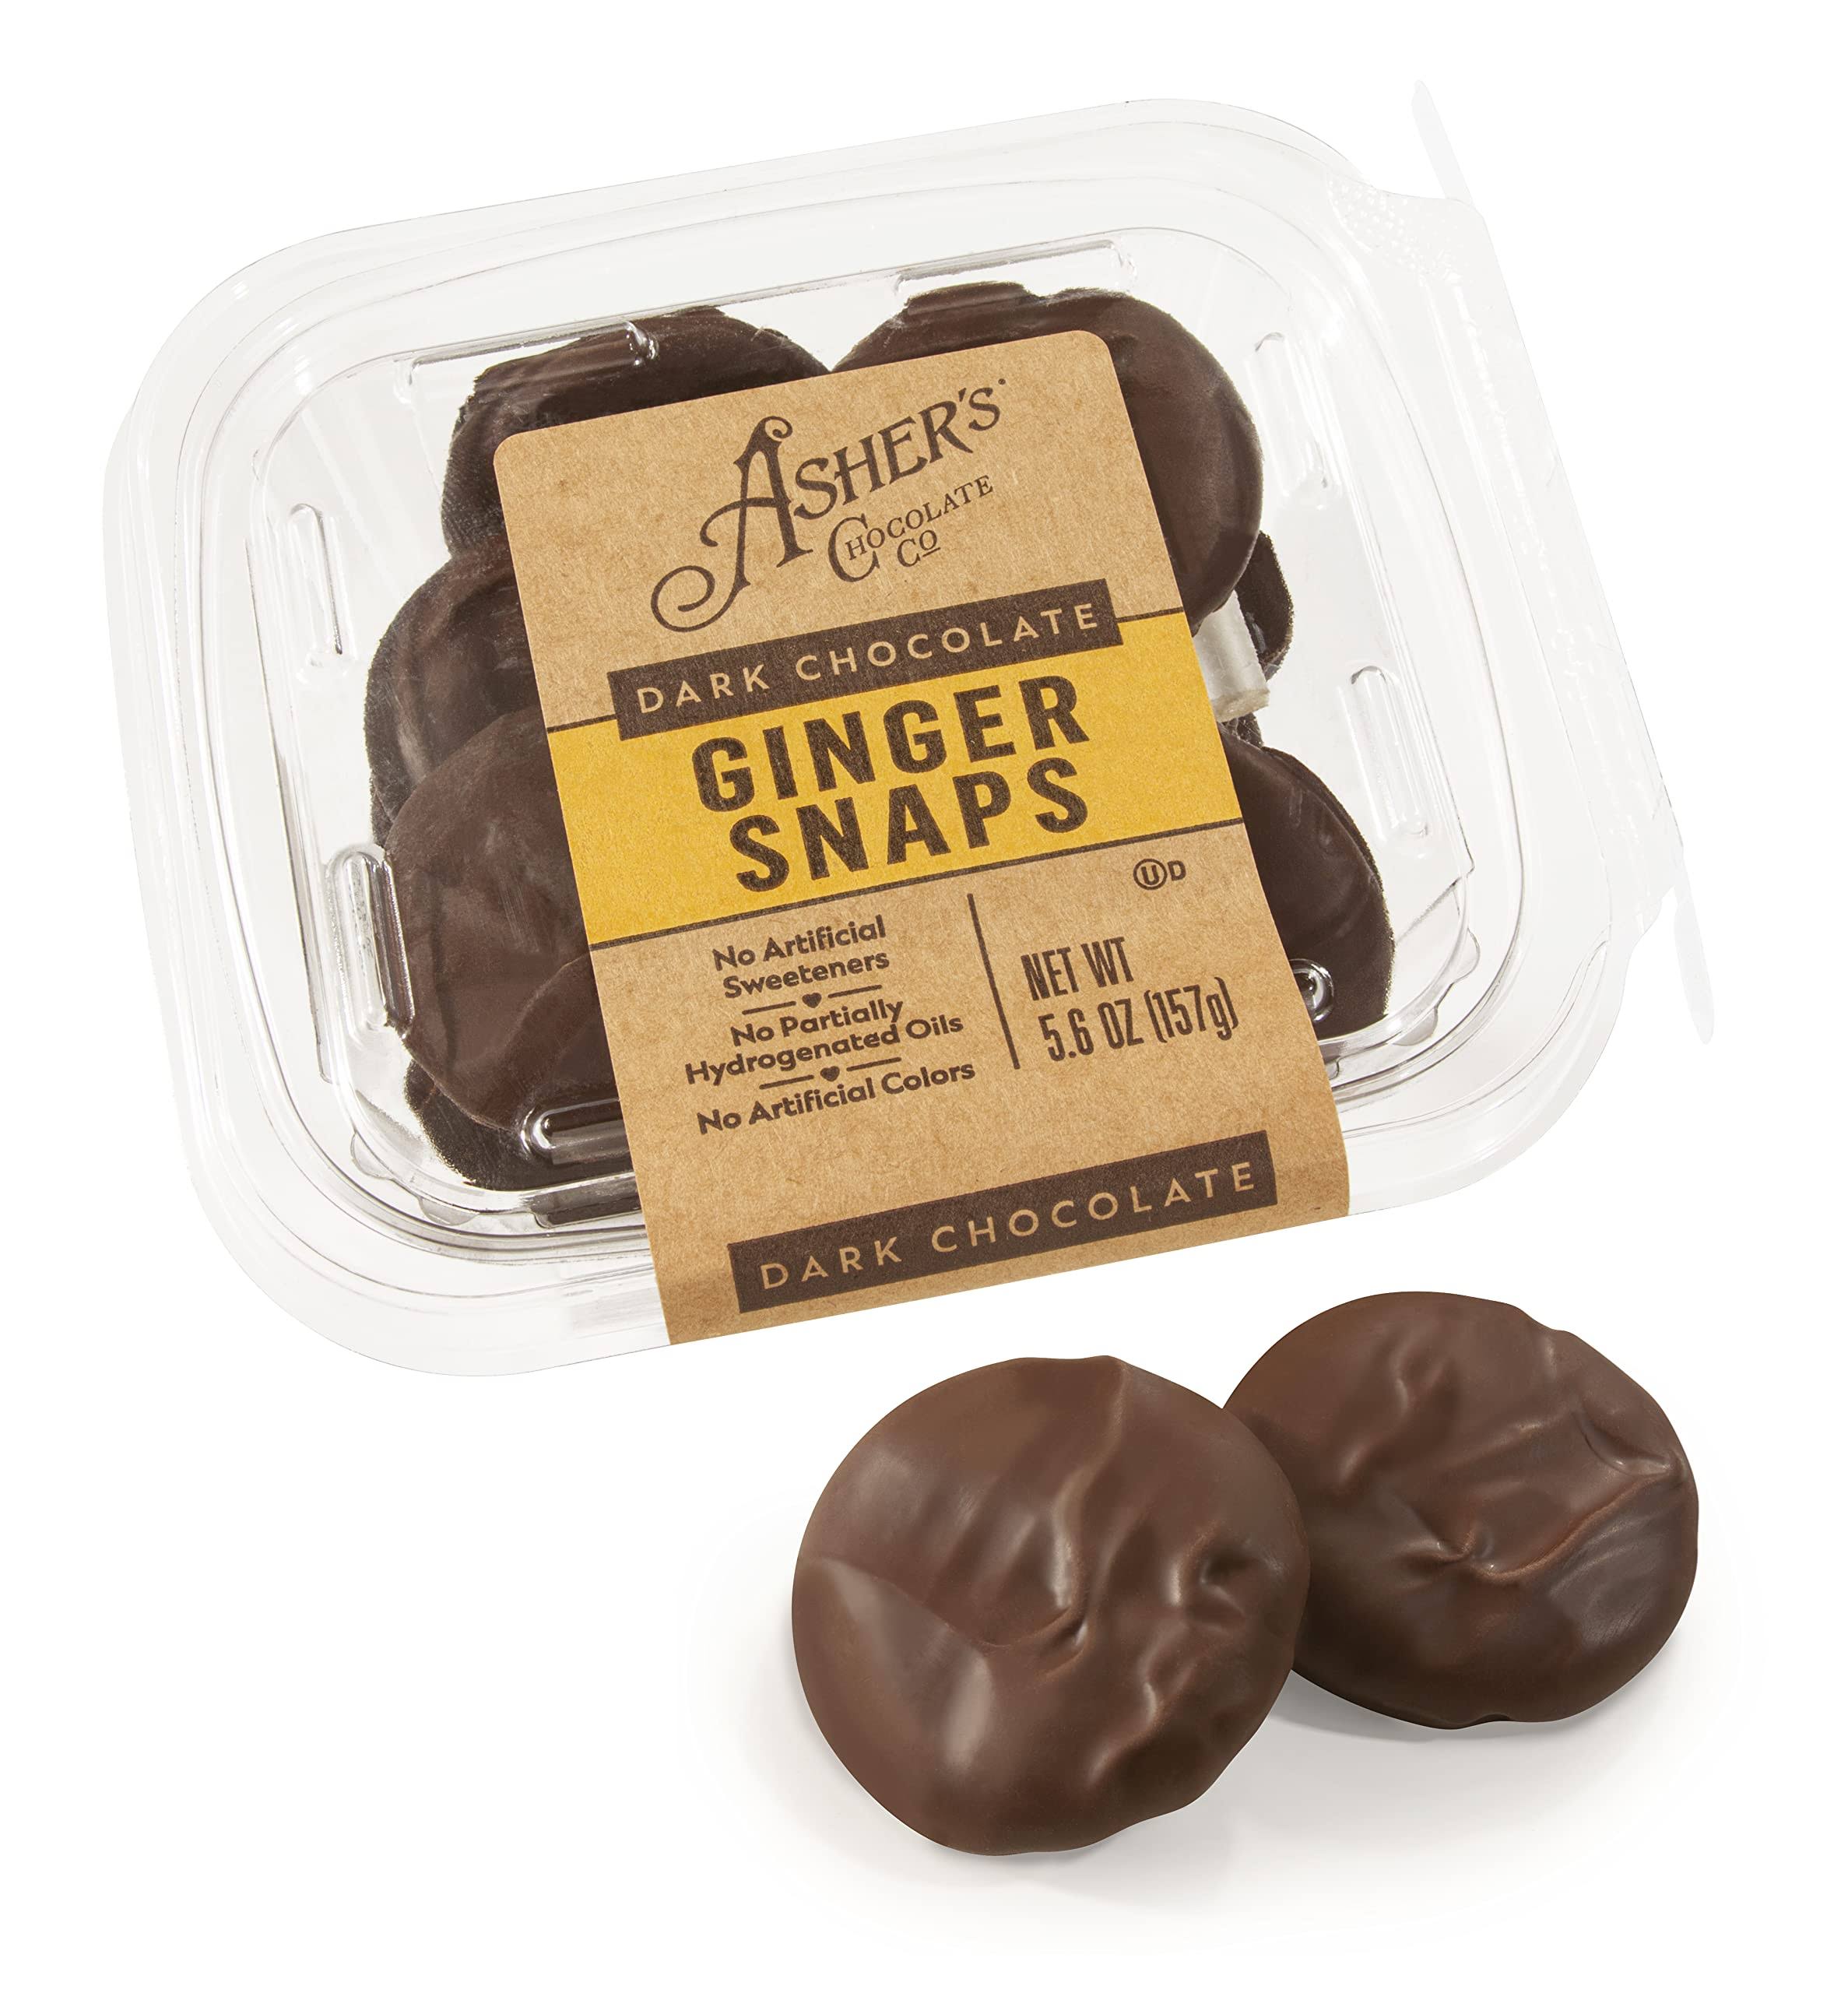 Asher's Chocolate Company, Delicious Dark Chocolate Ginger Snaps, Made from the Finest Kosher Chocolate, Family Owned Since 1892 (5.6oz, Dark